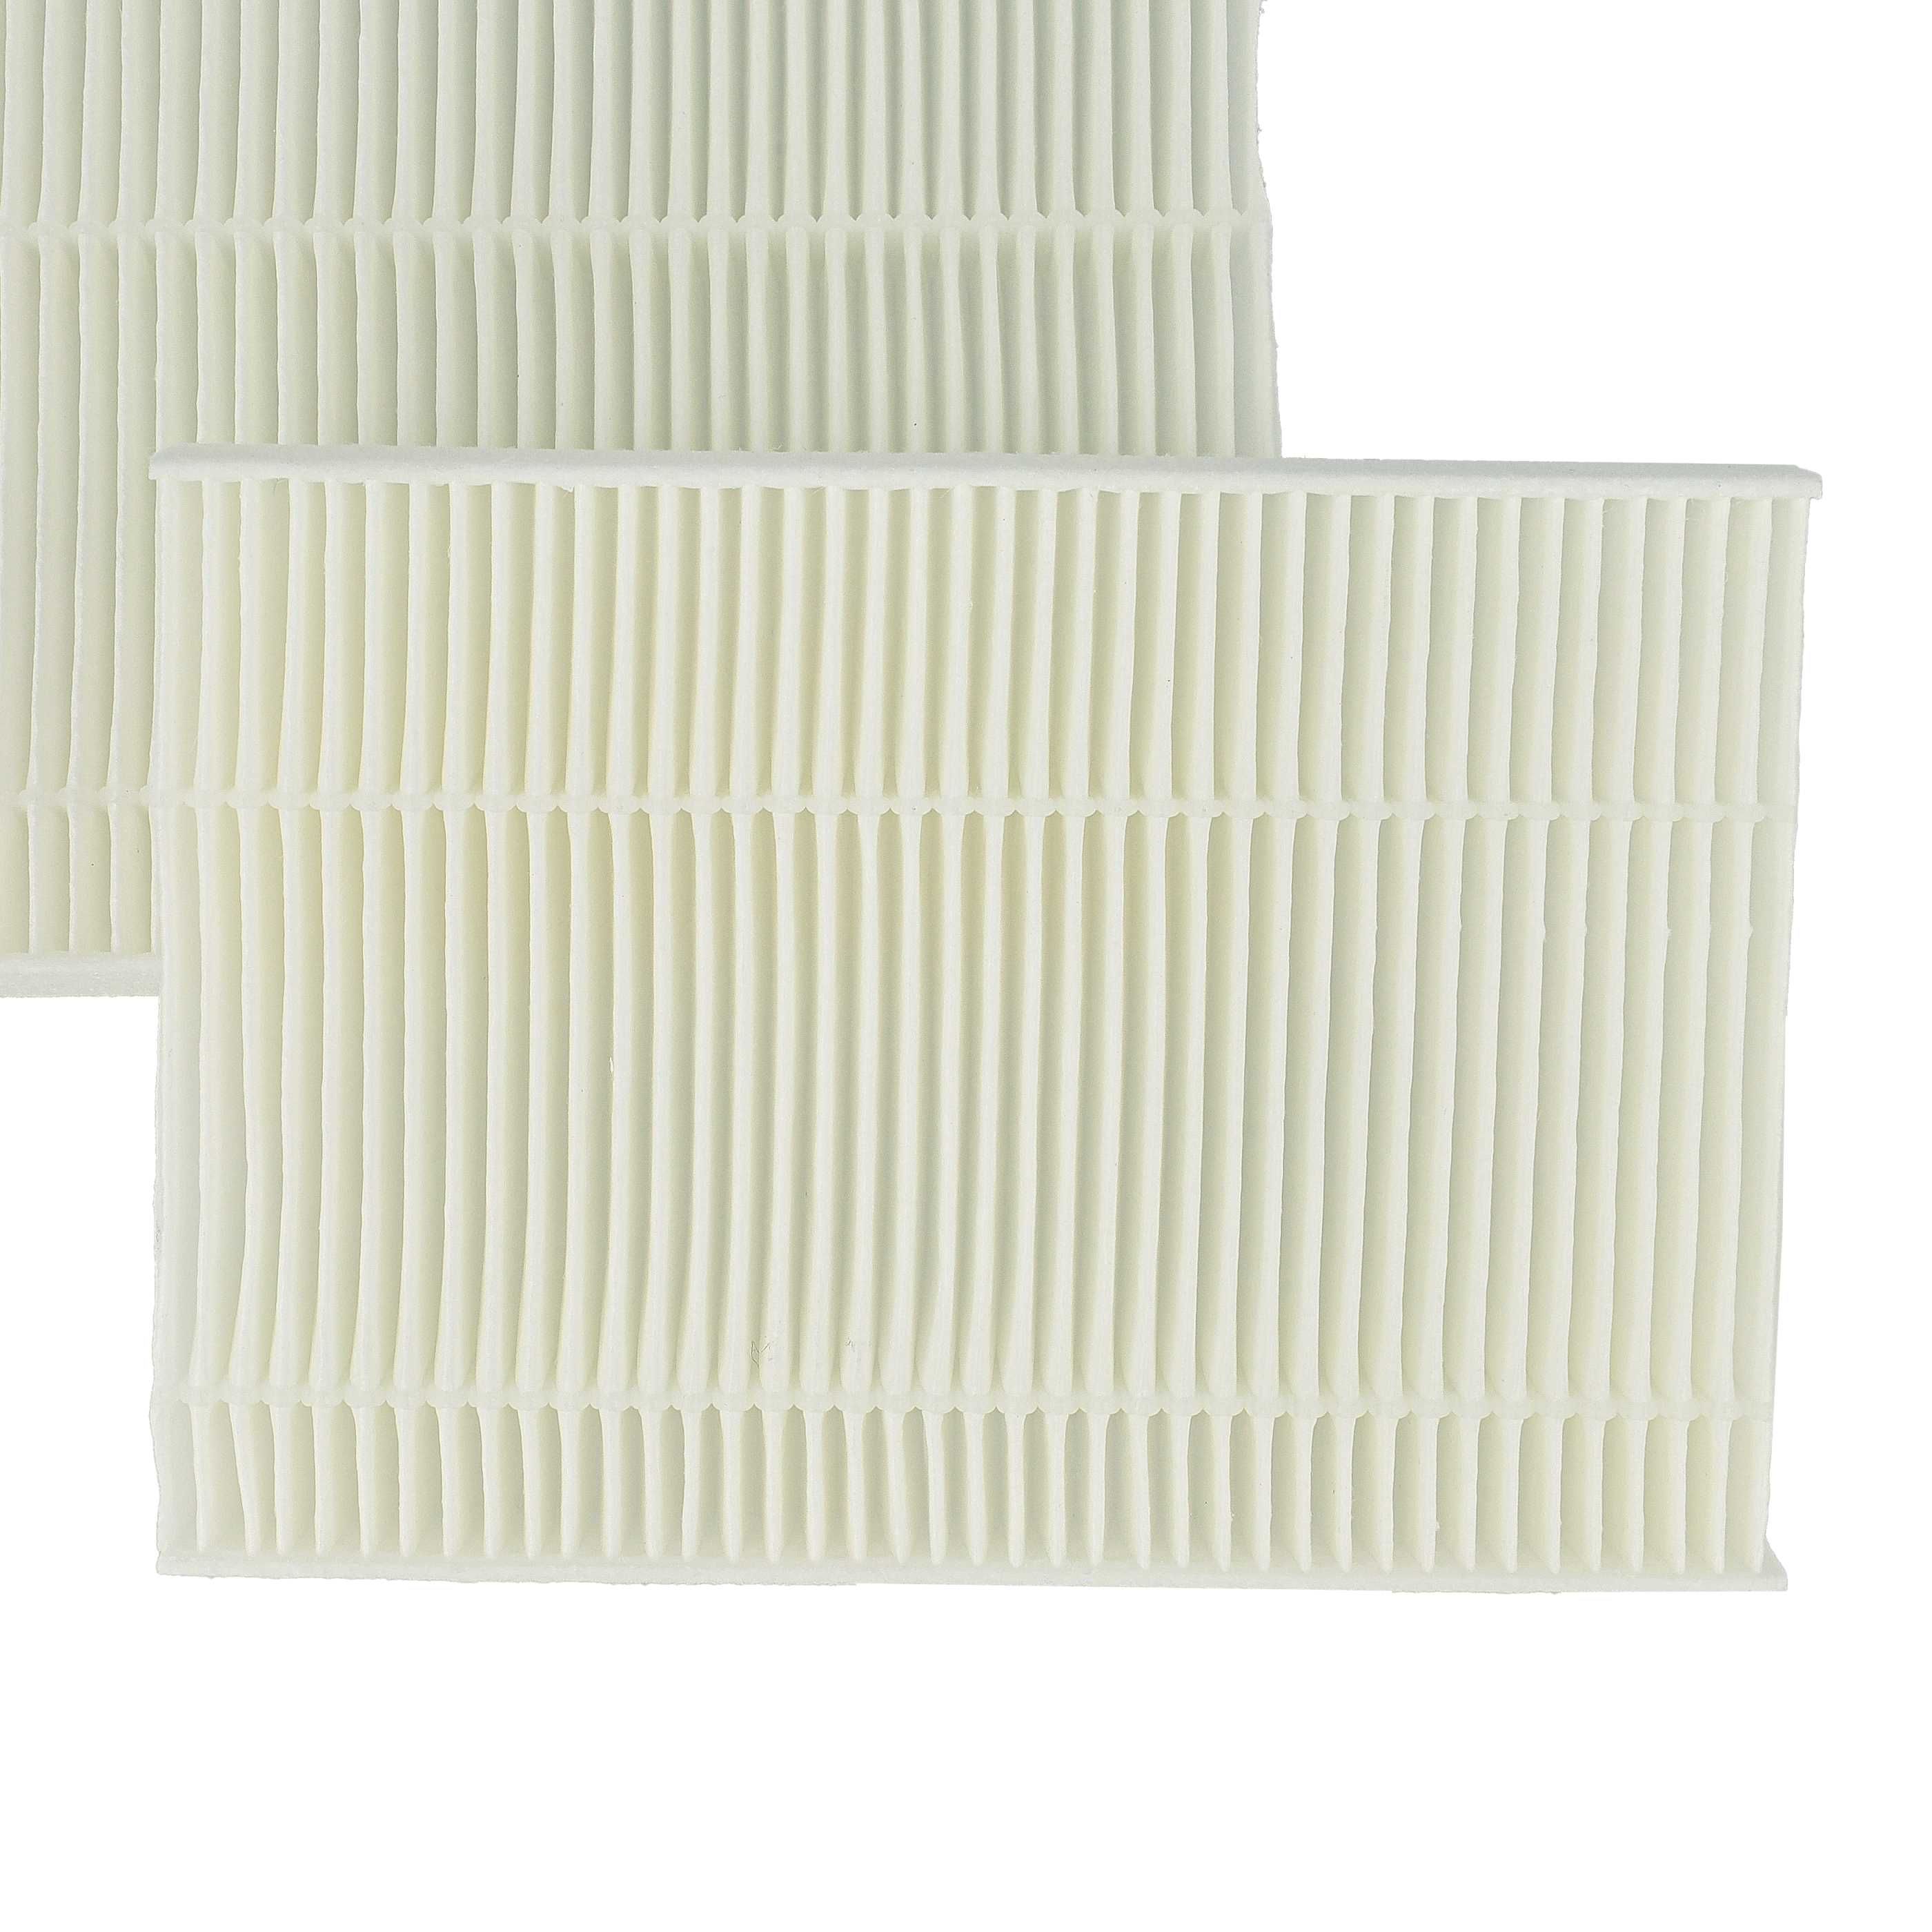 2x Pollen Filter as Replacement for Bosch 481723 Tumble Dryer etc.